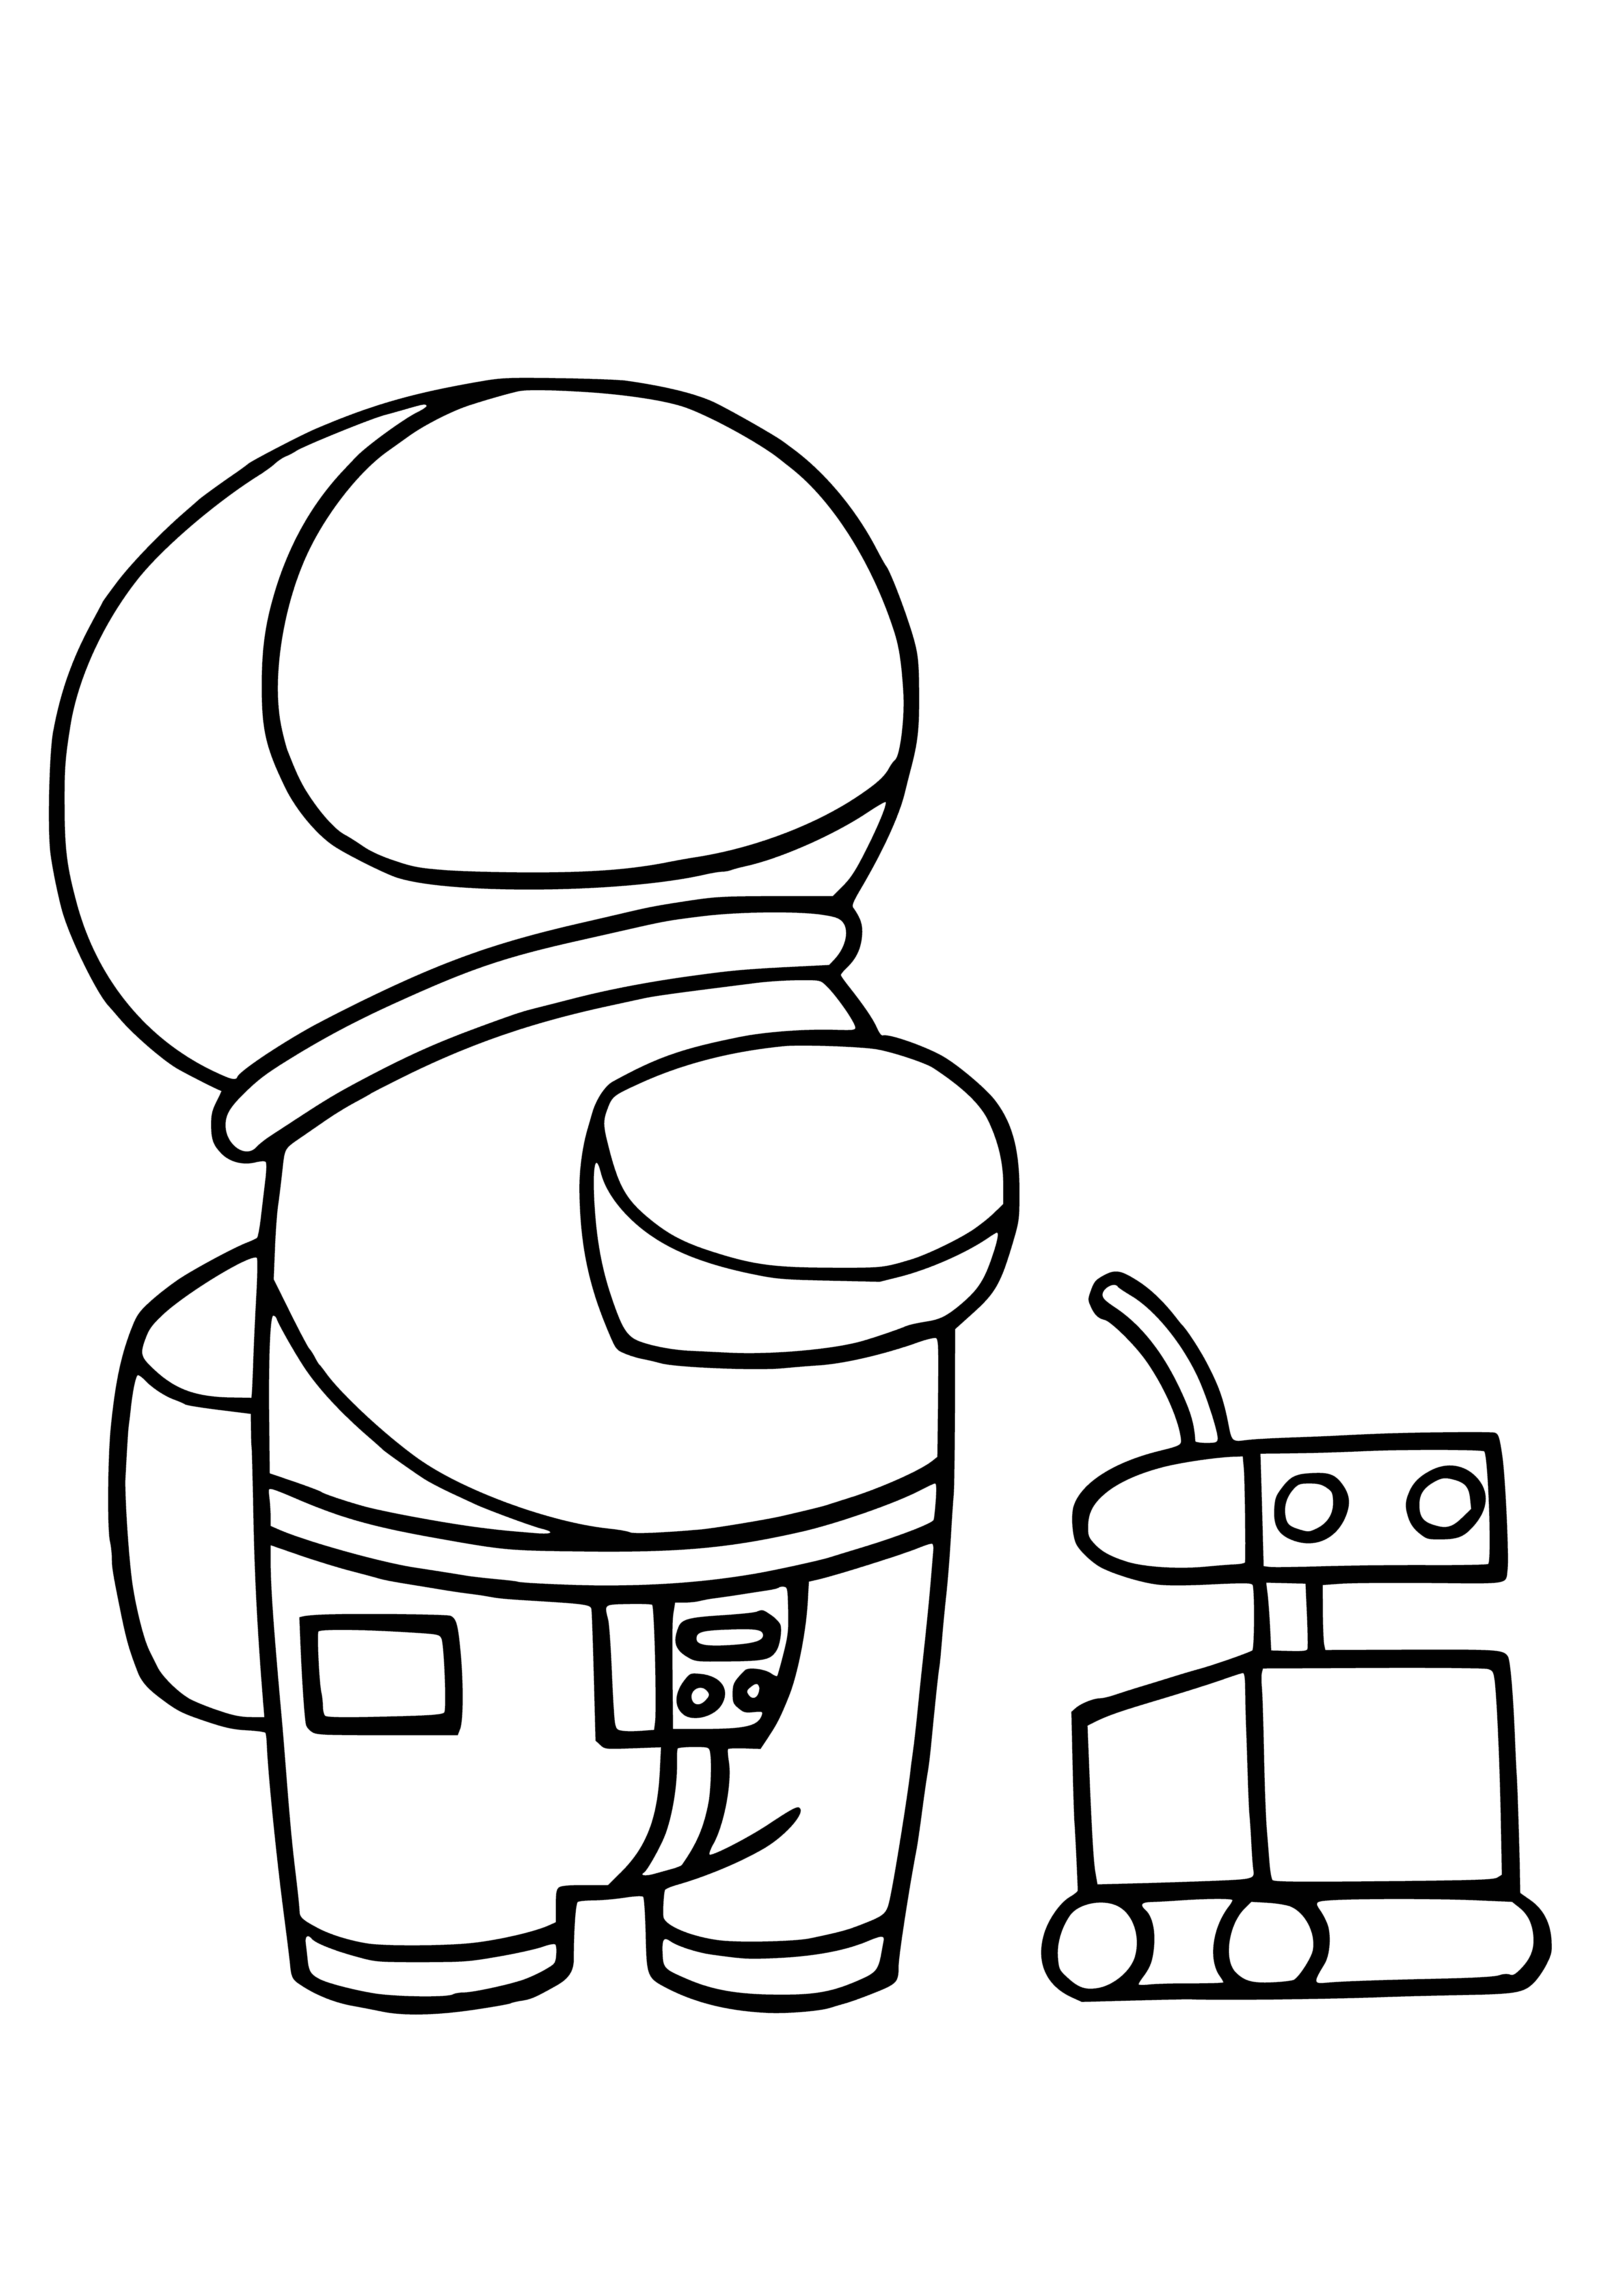 coloring page: Ten figures in space suits: 8 seated at a laptop, 2 standing in back.